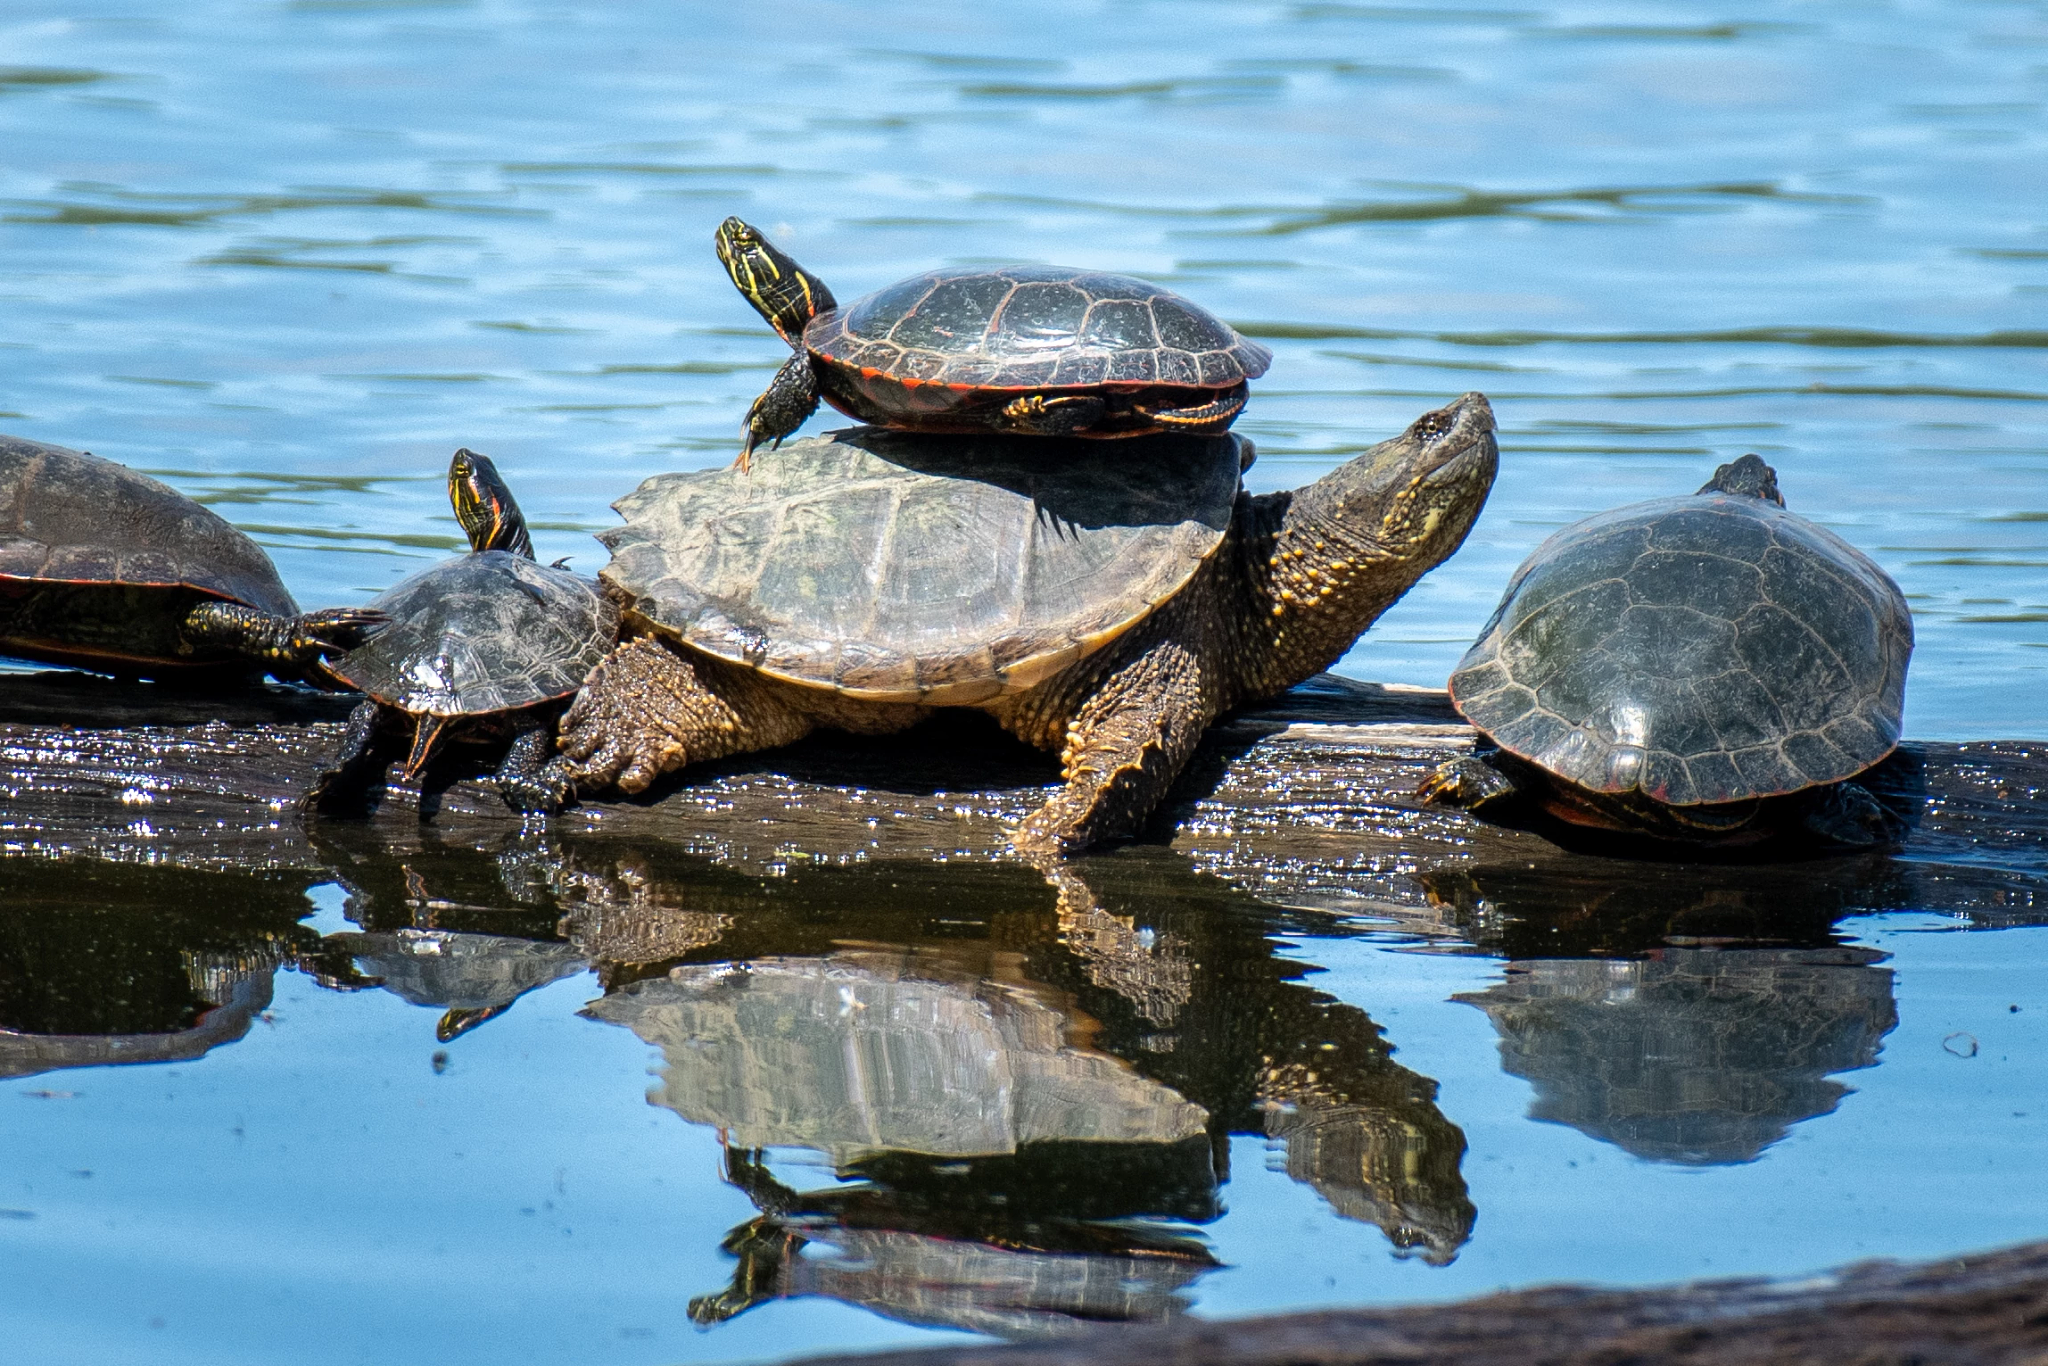 Four painted turtles and one snapping turtle sun themselves on a log.